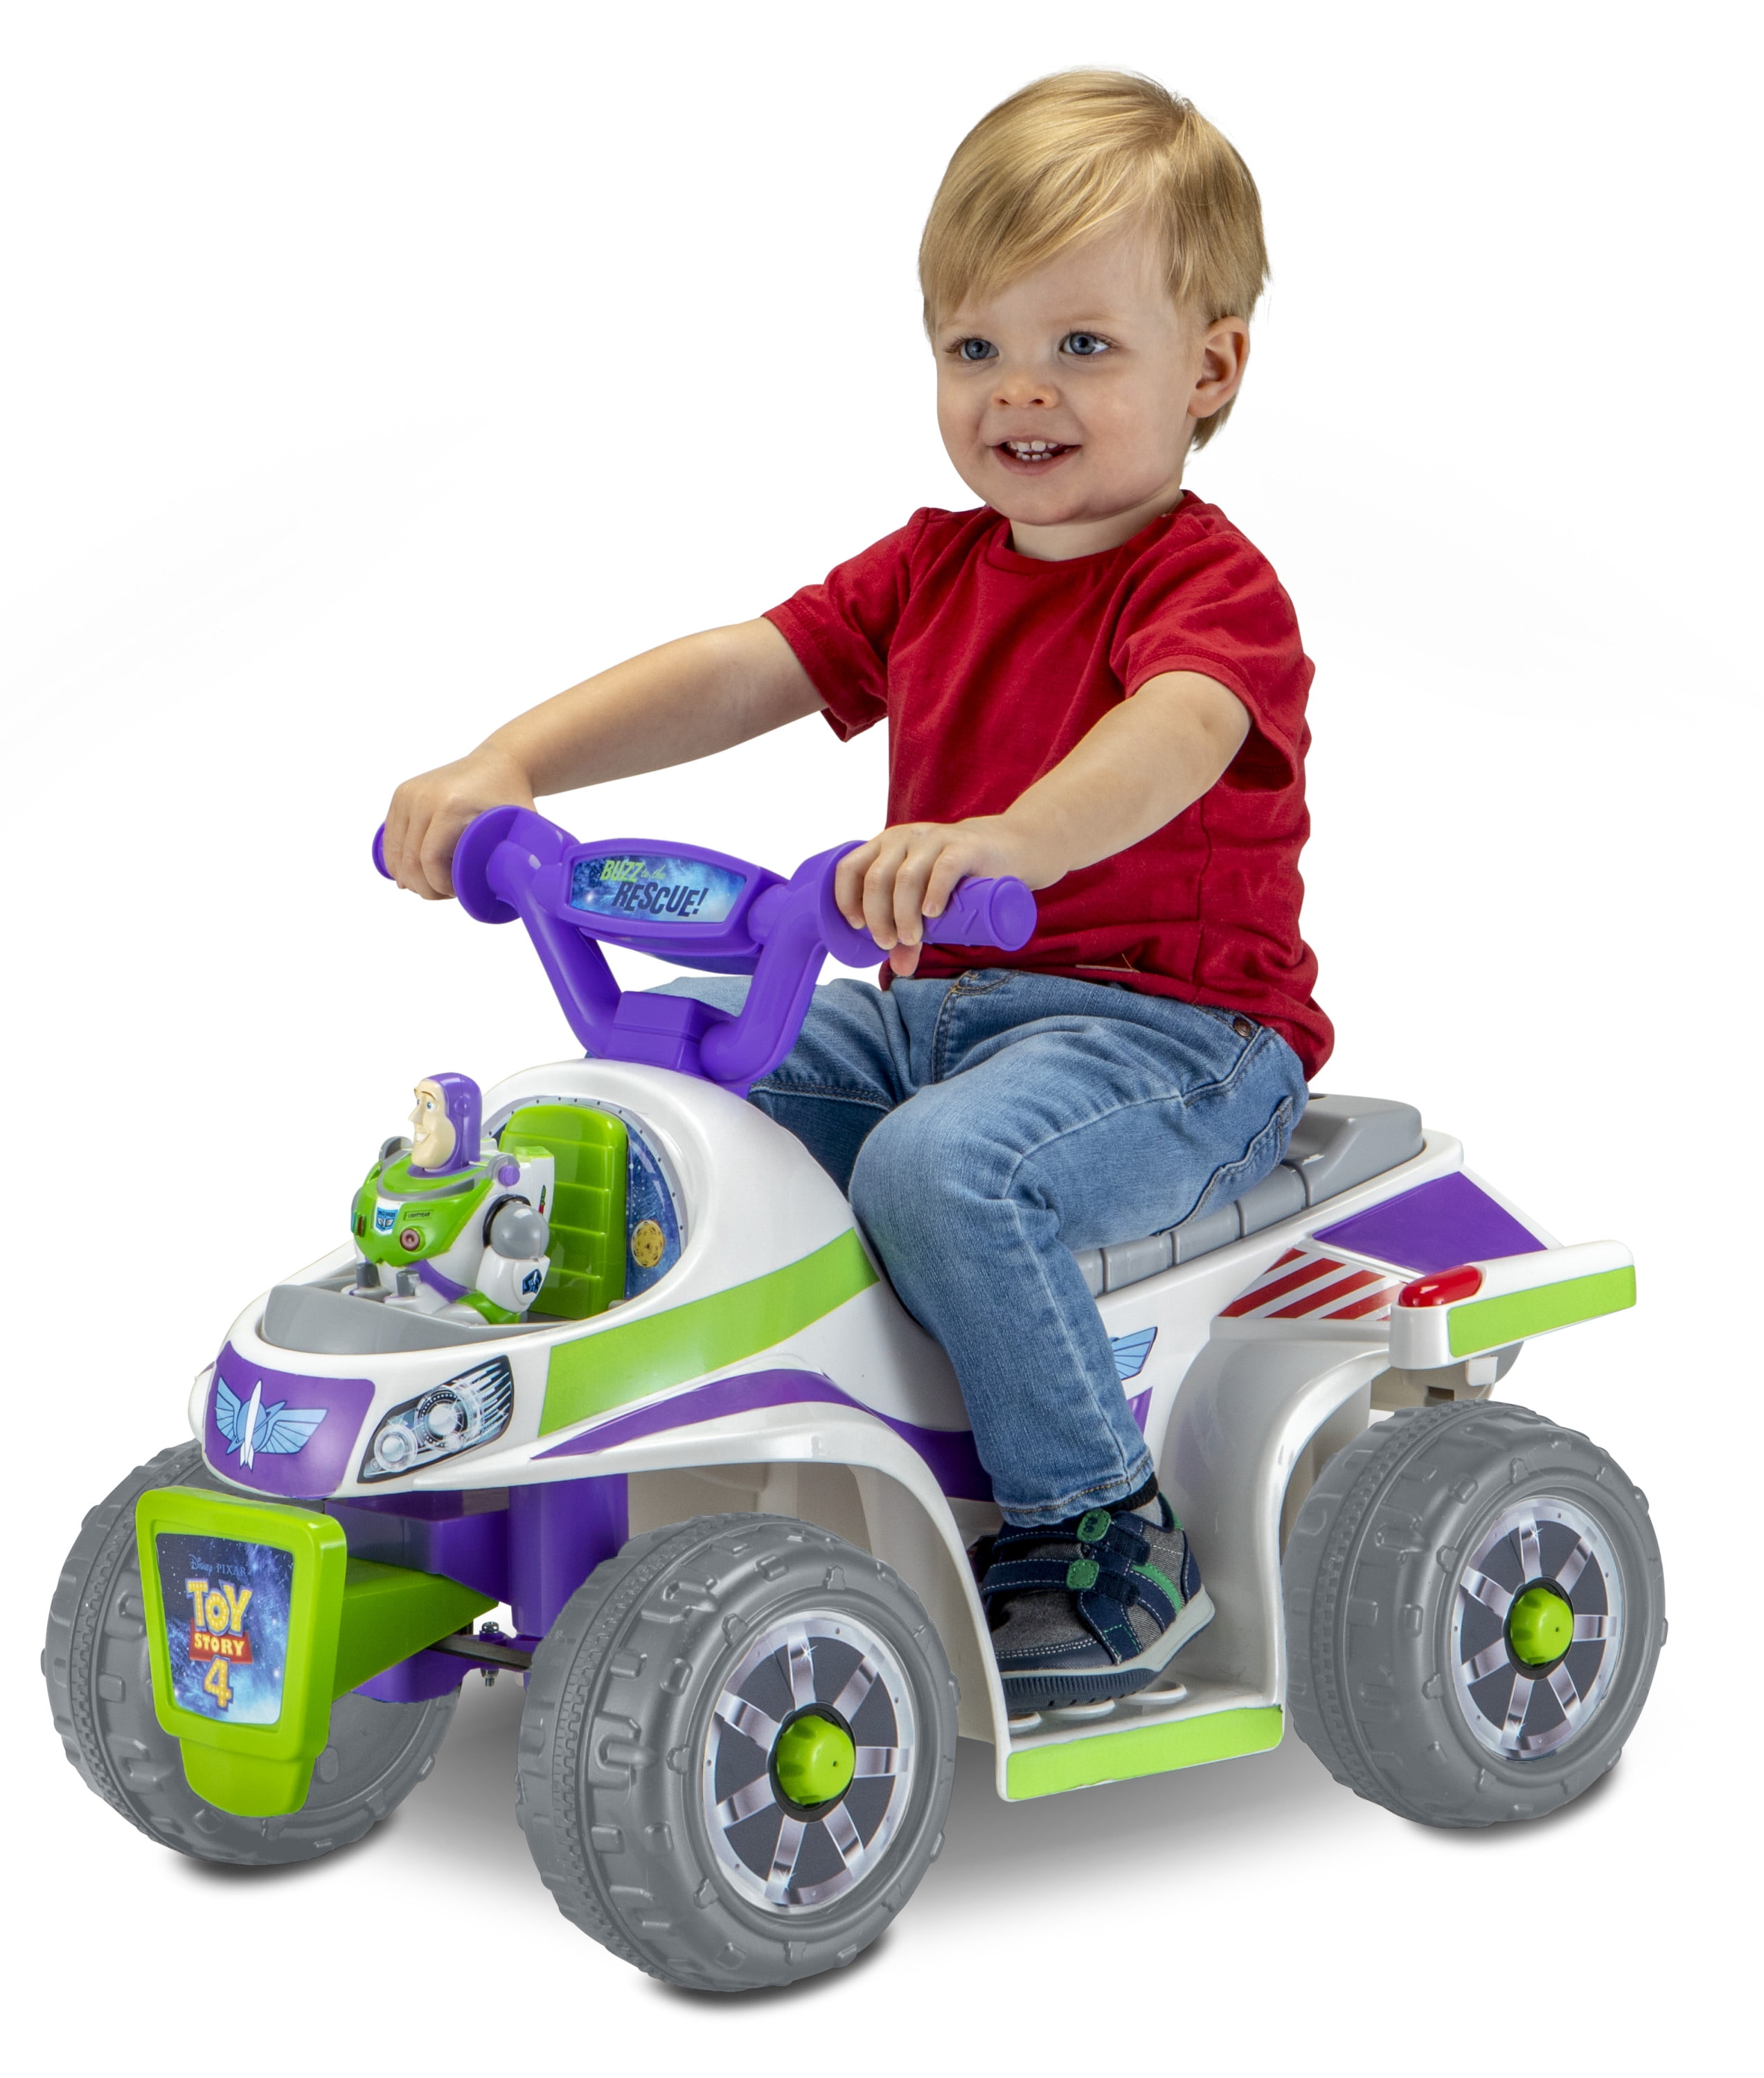 rider toys for toddlers